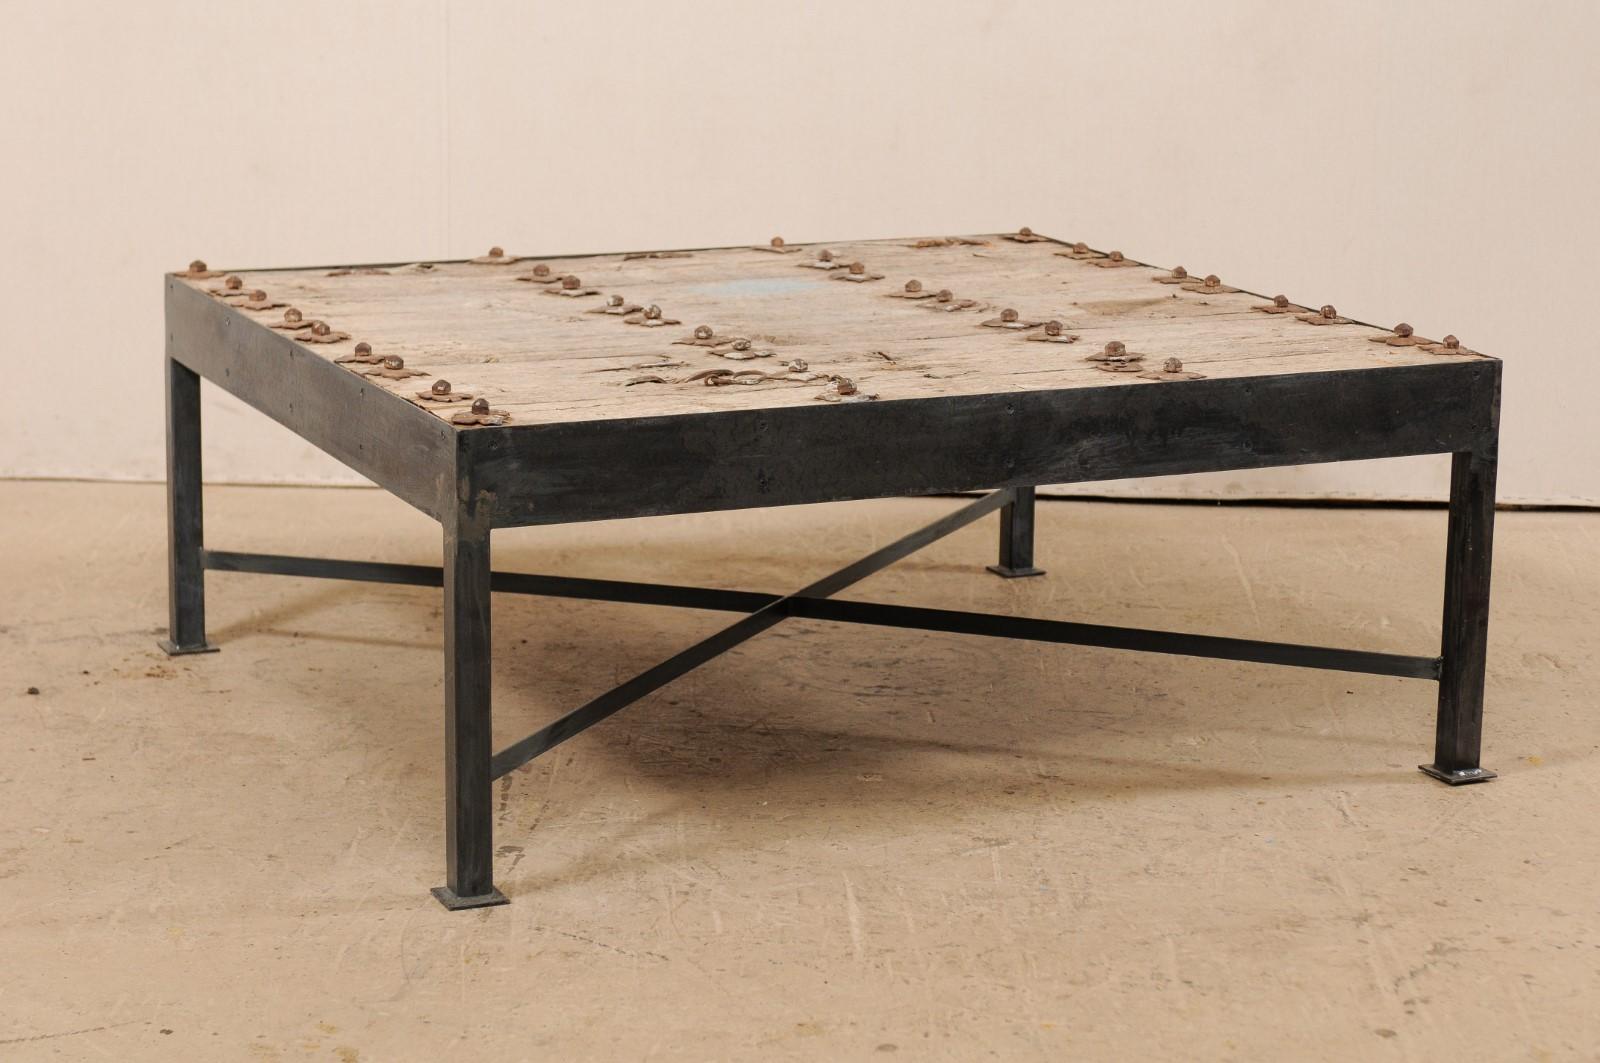 This is a custom coffee table made from an 18th century Spanish door. This wonderful coffee table has been fashioned from an 18th century Spanish door, featuring a wood plank top, with beautifully weathered patina, which is adorn in rows with it's